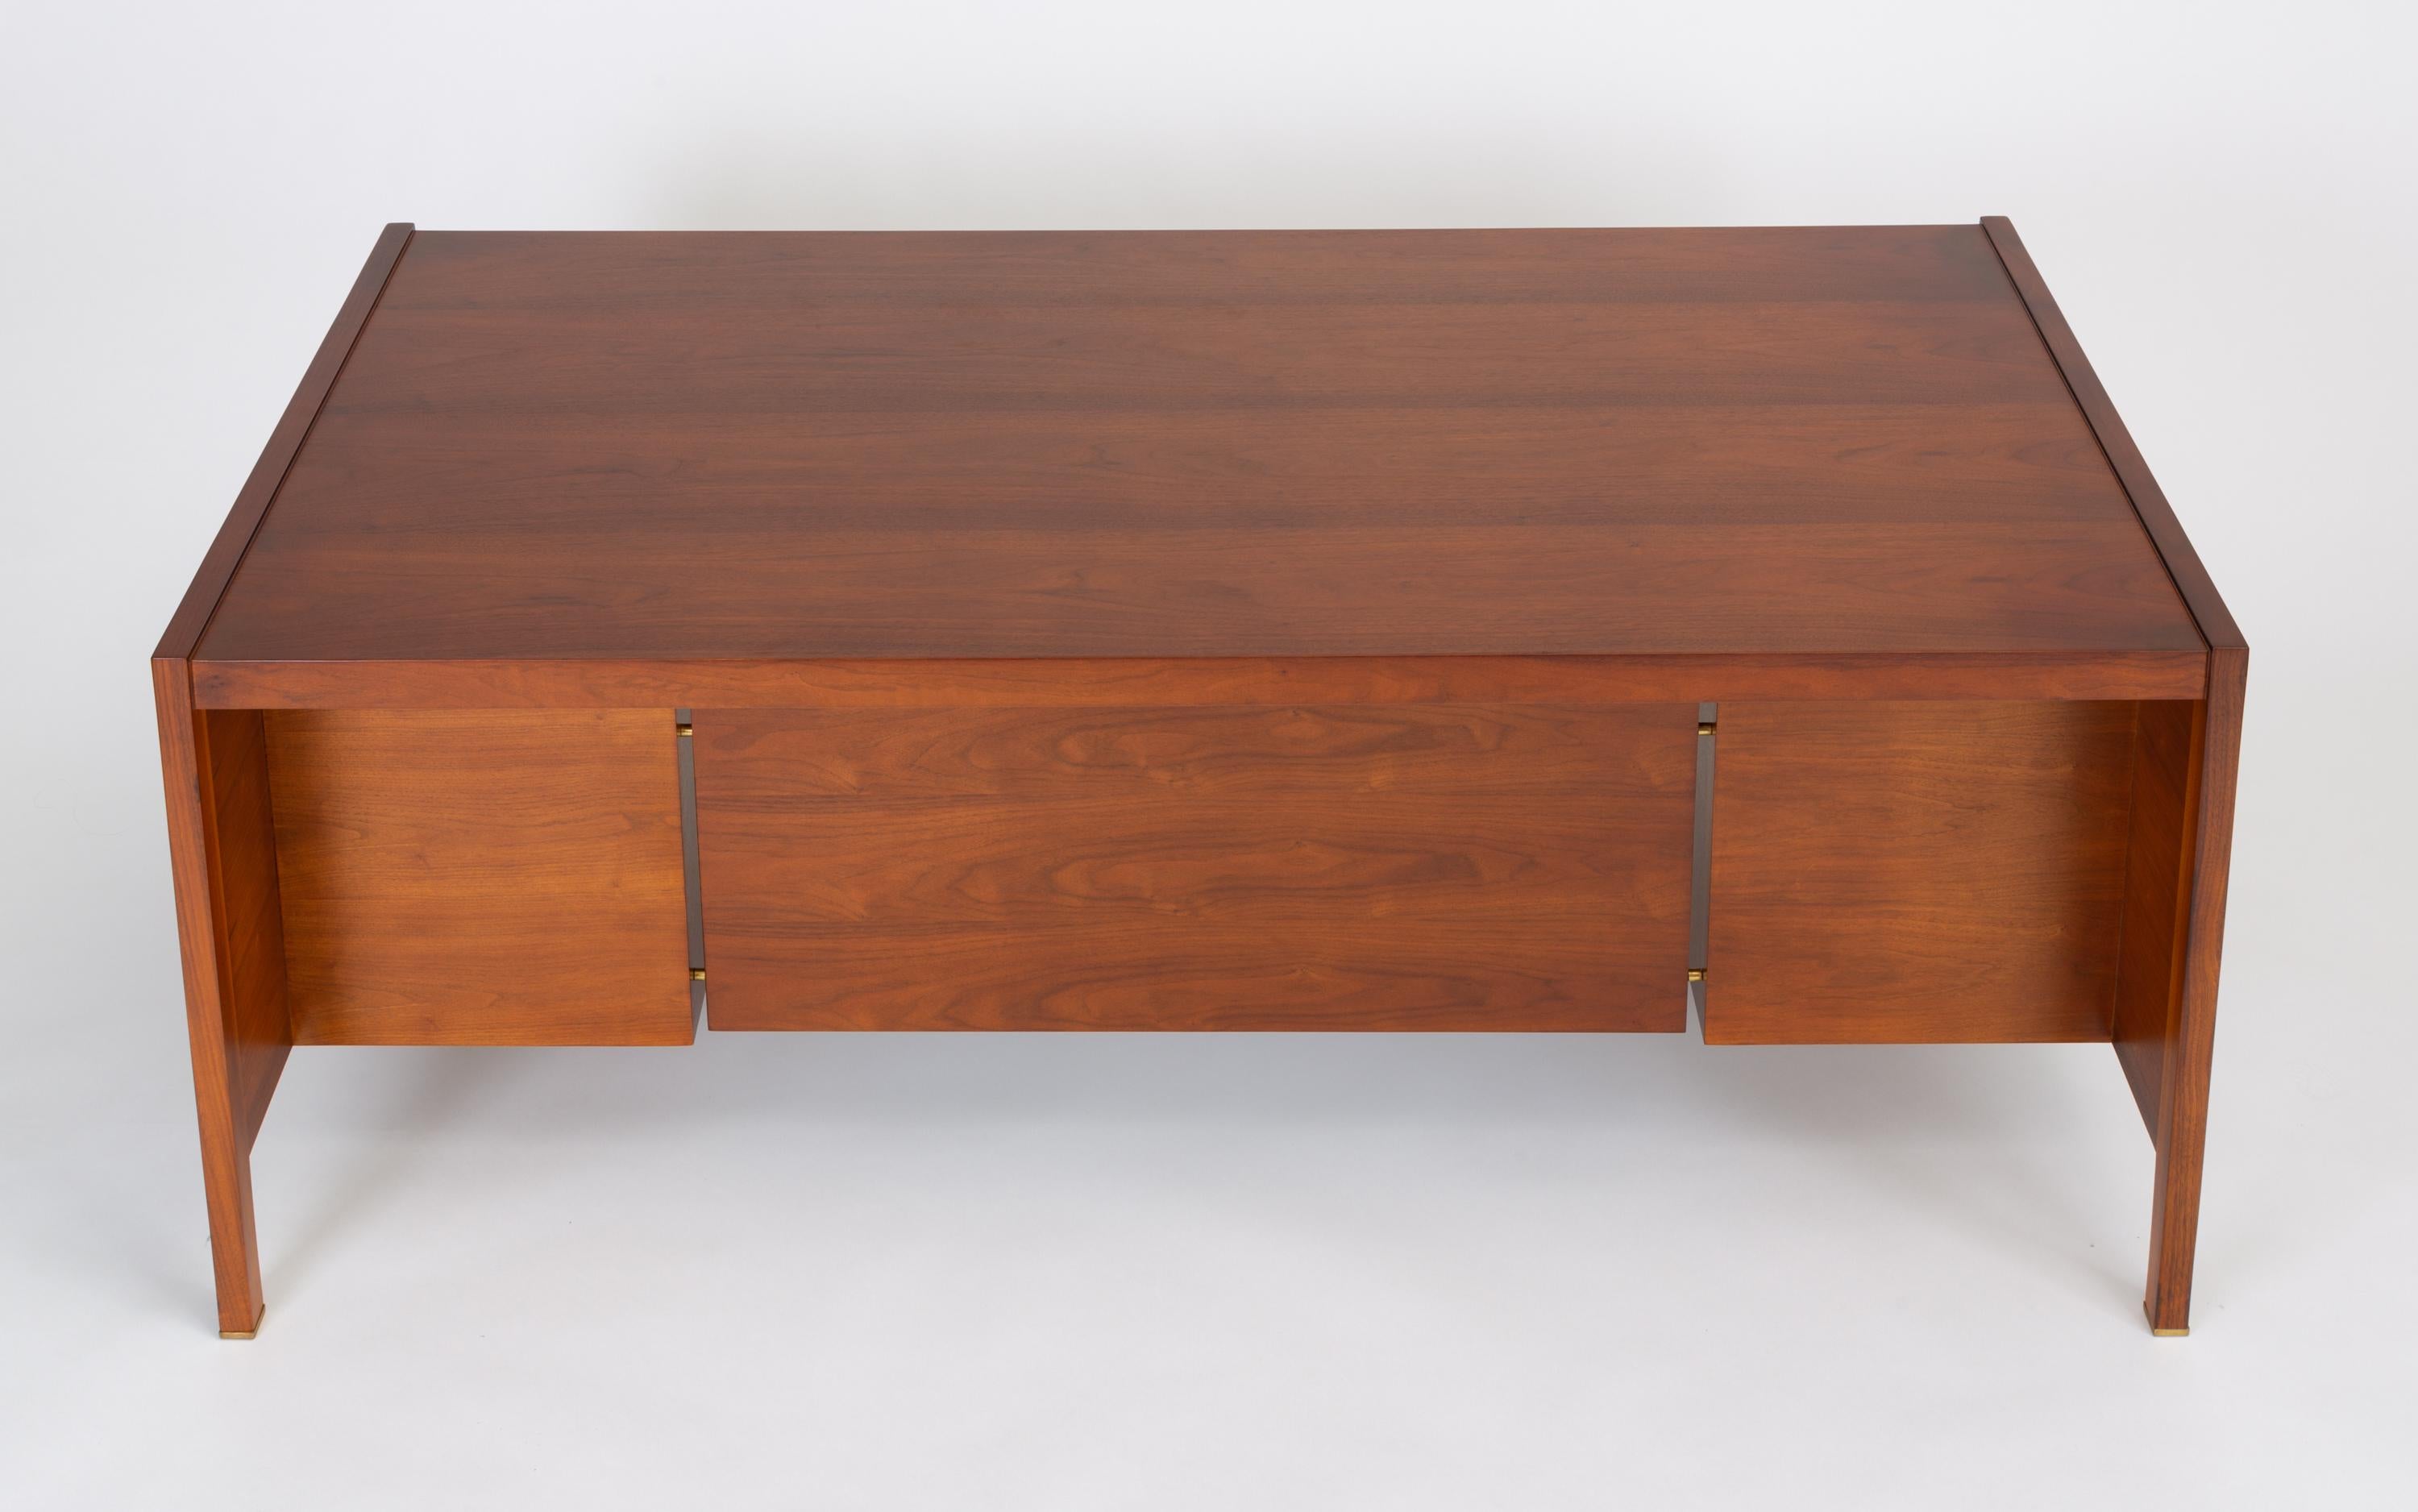 Walnut Executive Desk with Rosewood and Brass Details, Edward Wormley for Dunbar 1